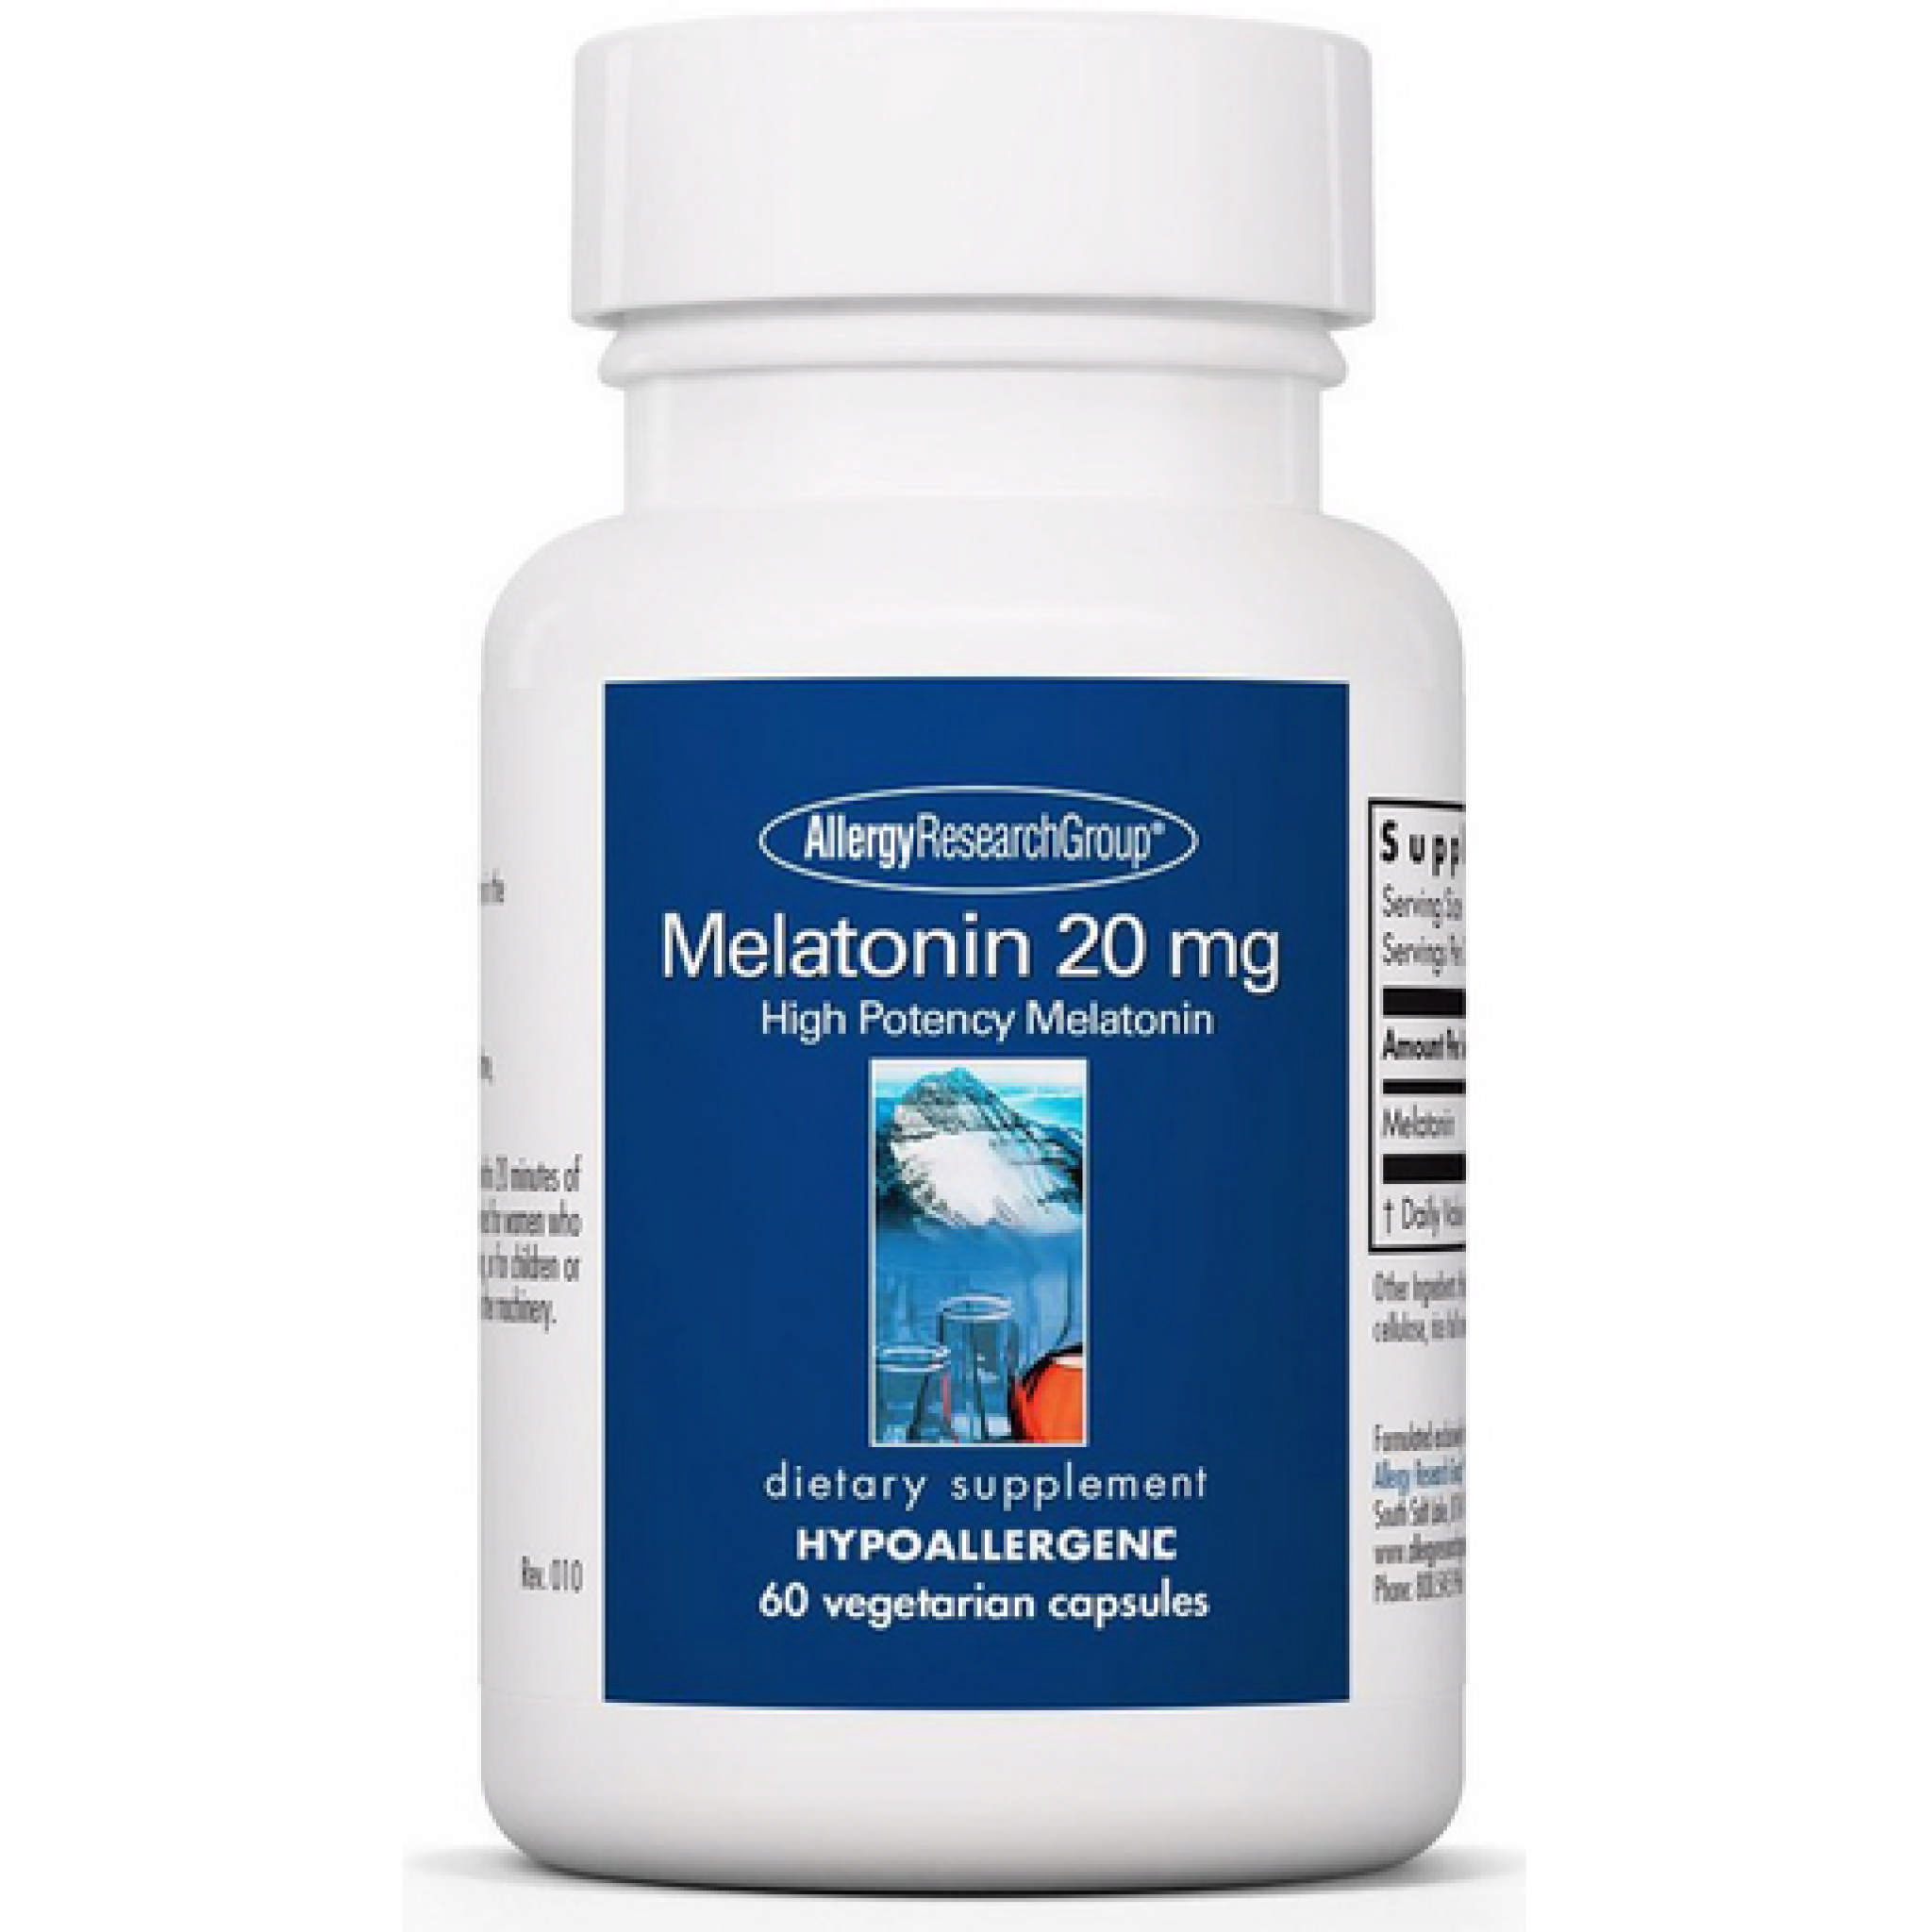 Allergy Research Group - Melatonin 20 mg (S Guard)